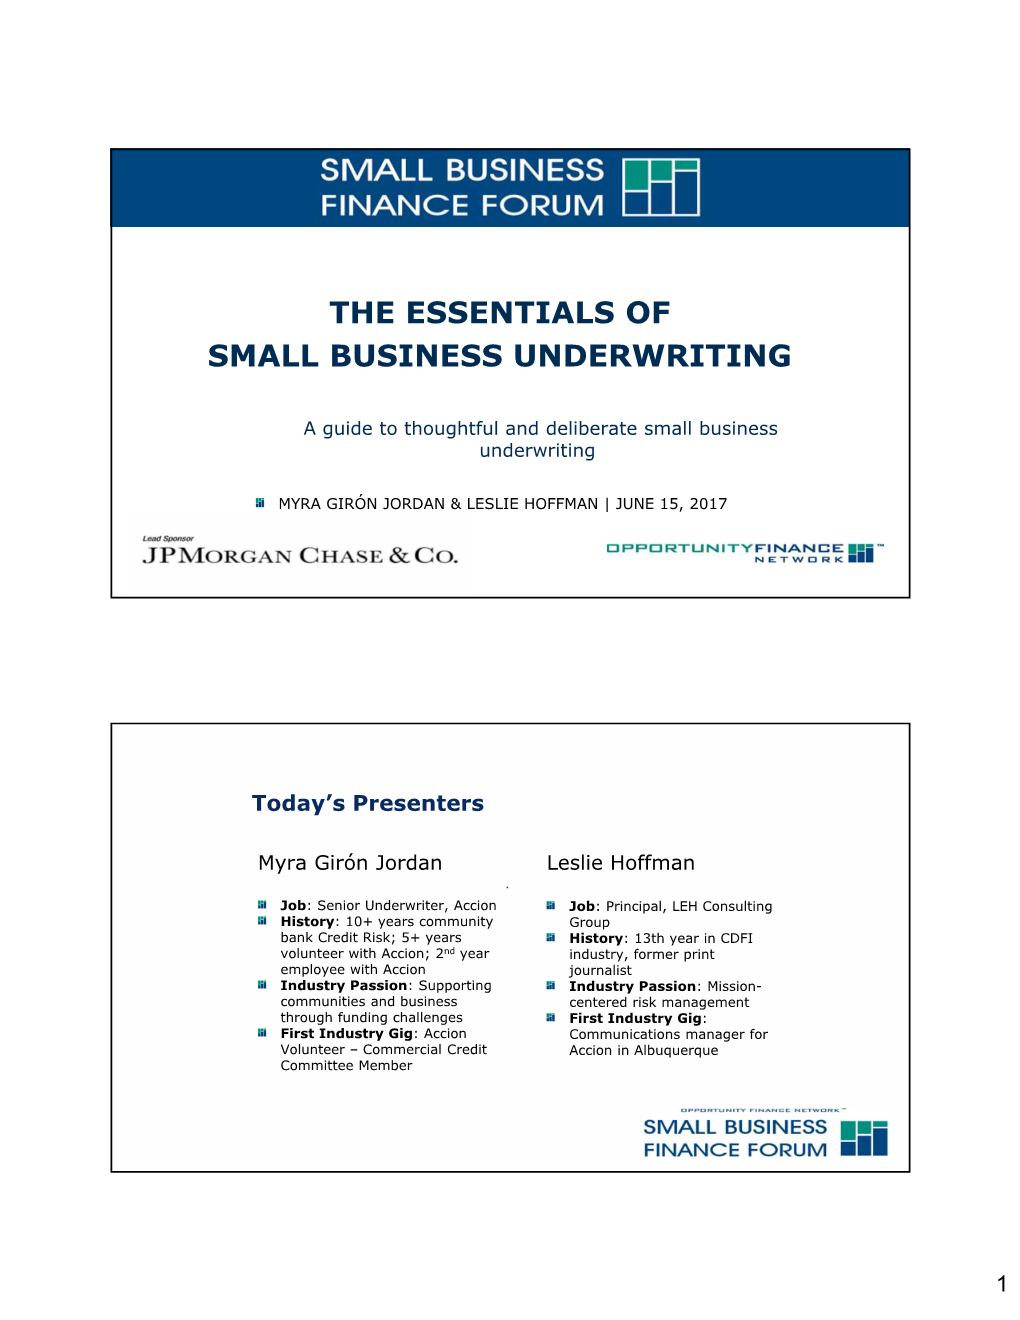 The Essentials of Small Business Underwriting